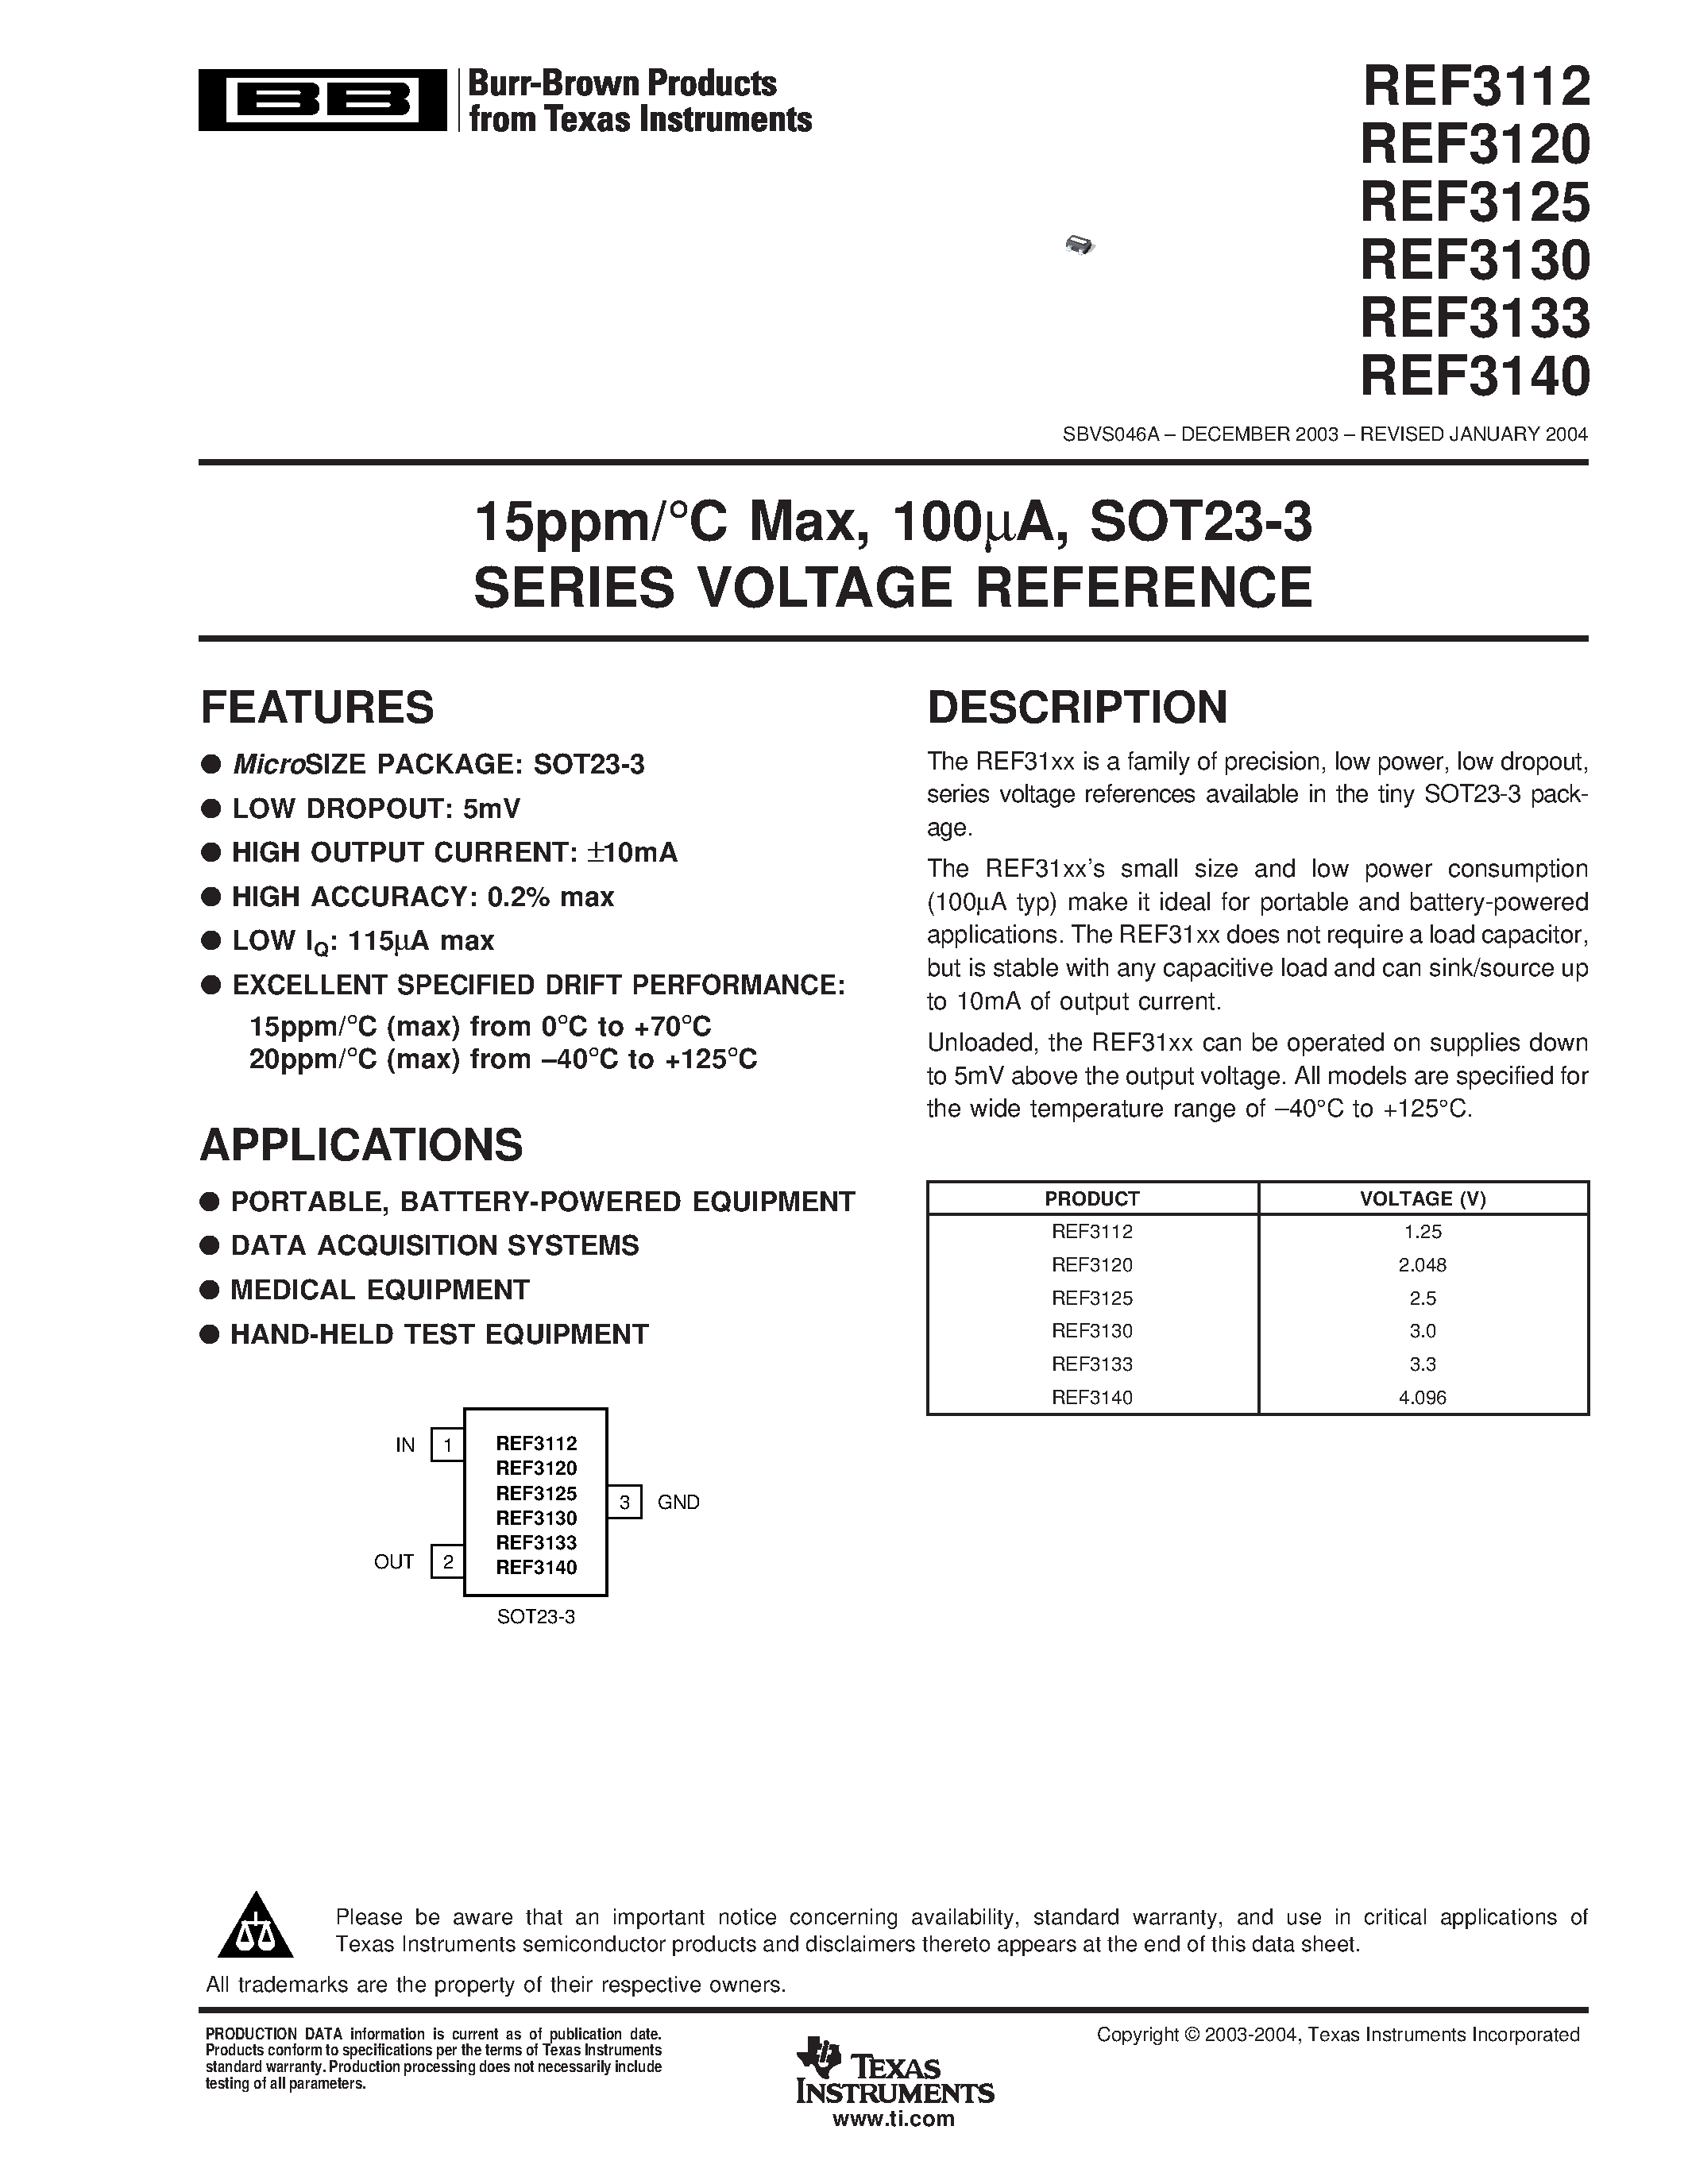 Datasheet REF3140 - 15ppm/C Max/ 100UA/ SOT23-3 SERIES VOLTAGE REFERENCE page 1